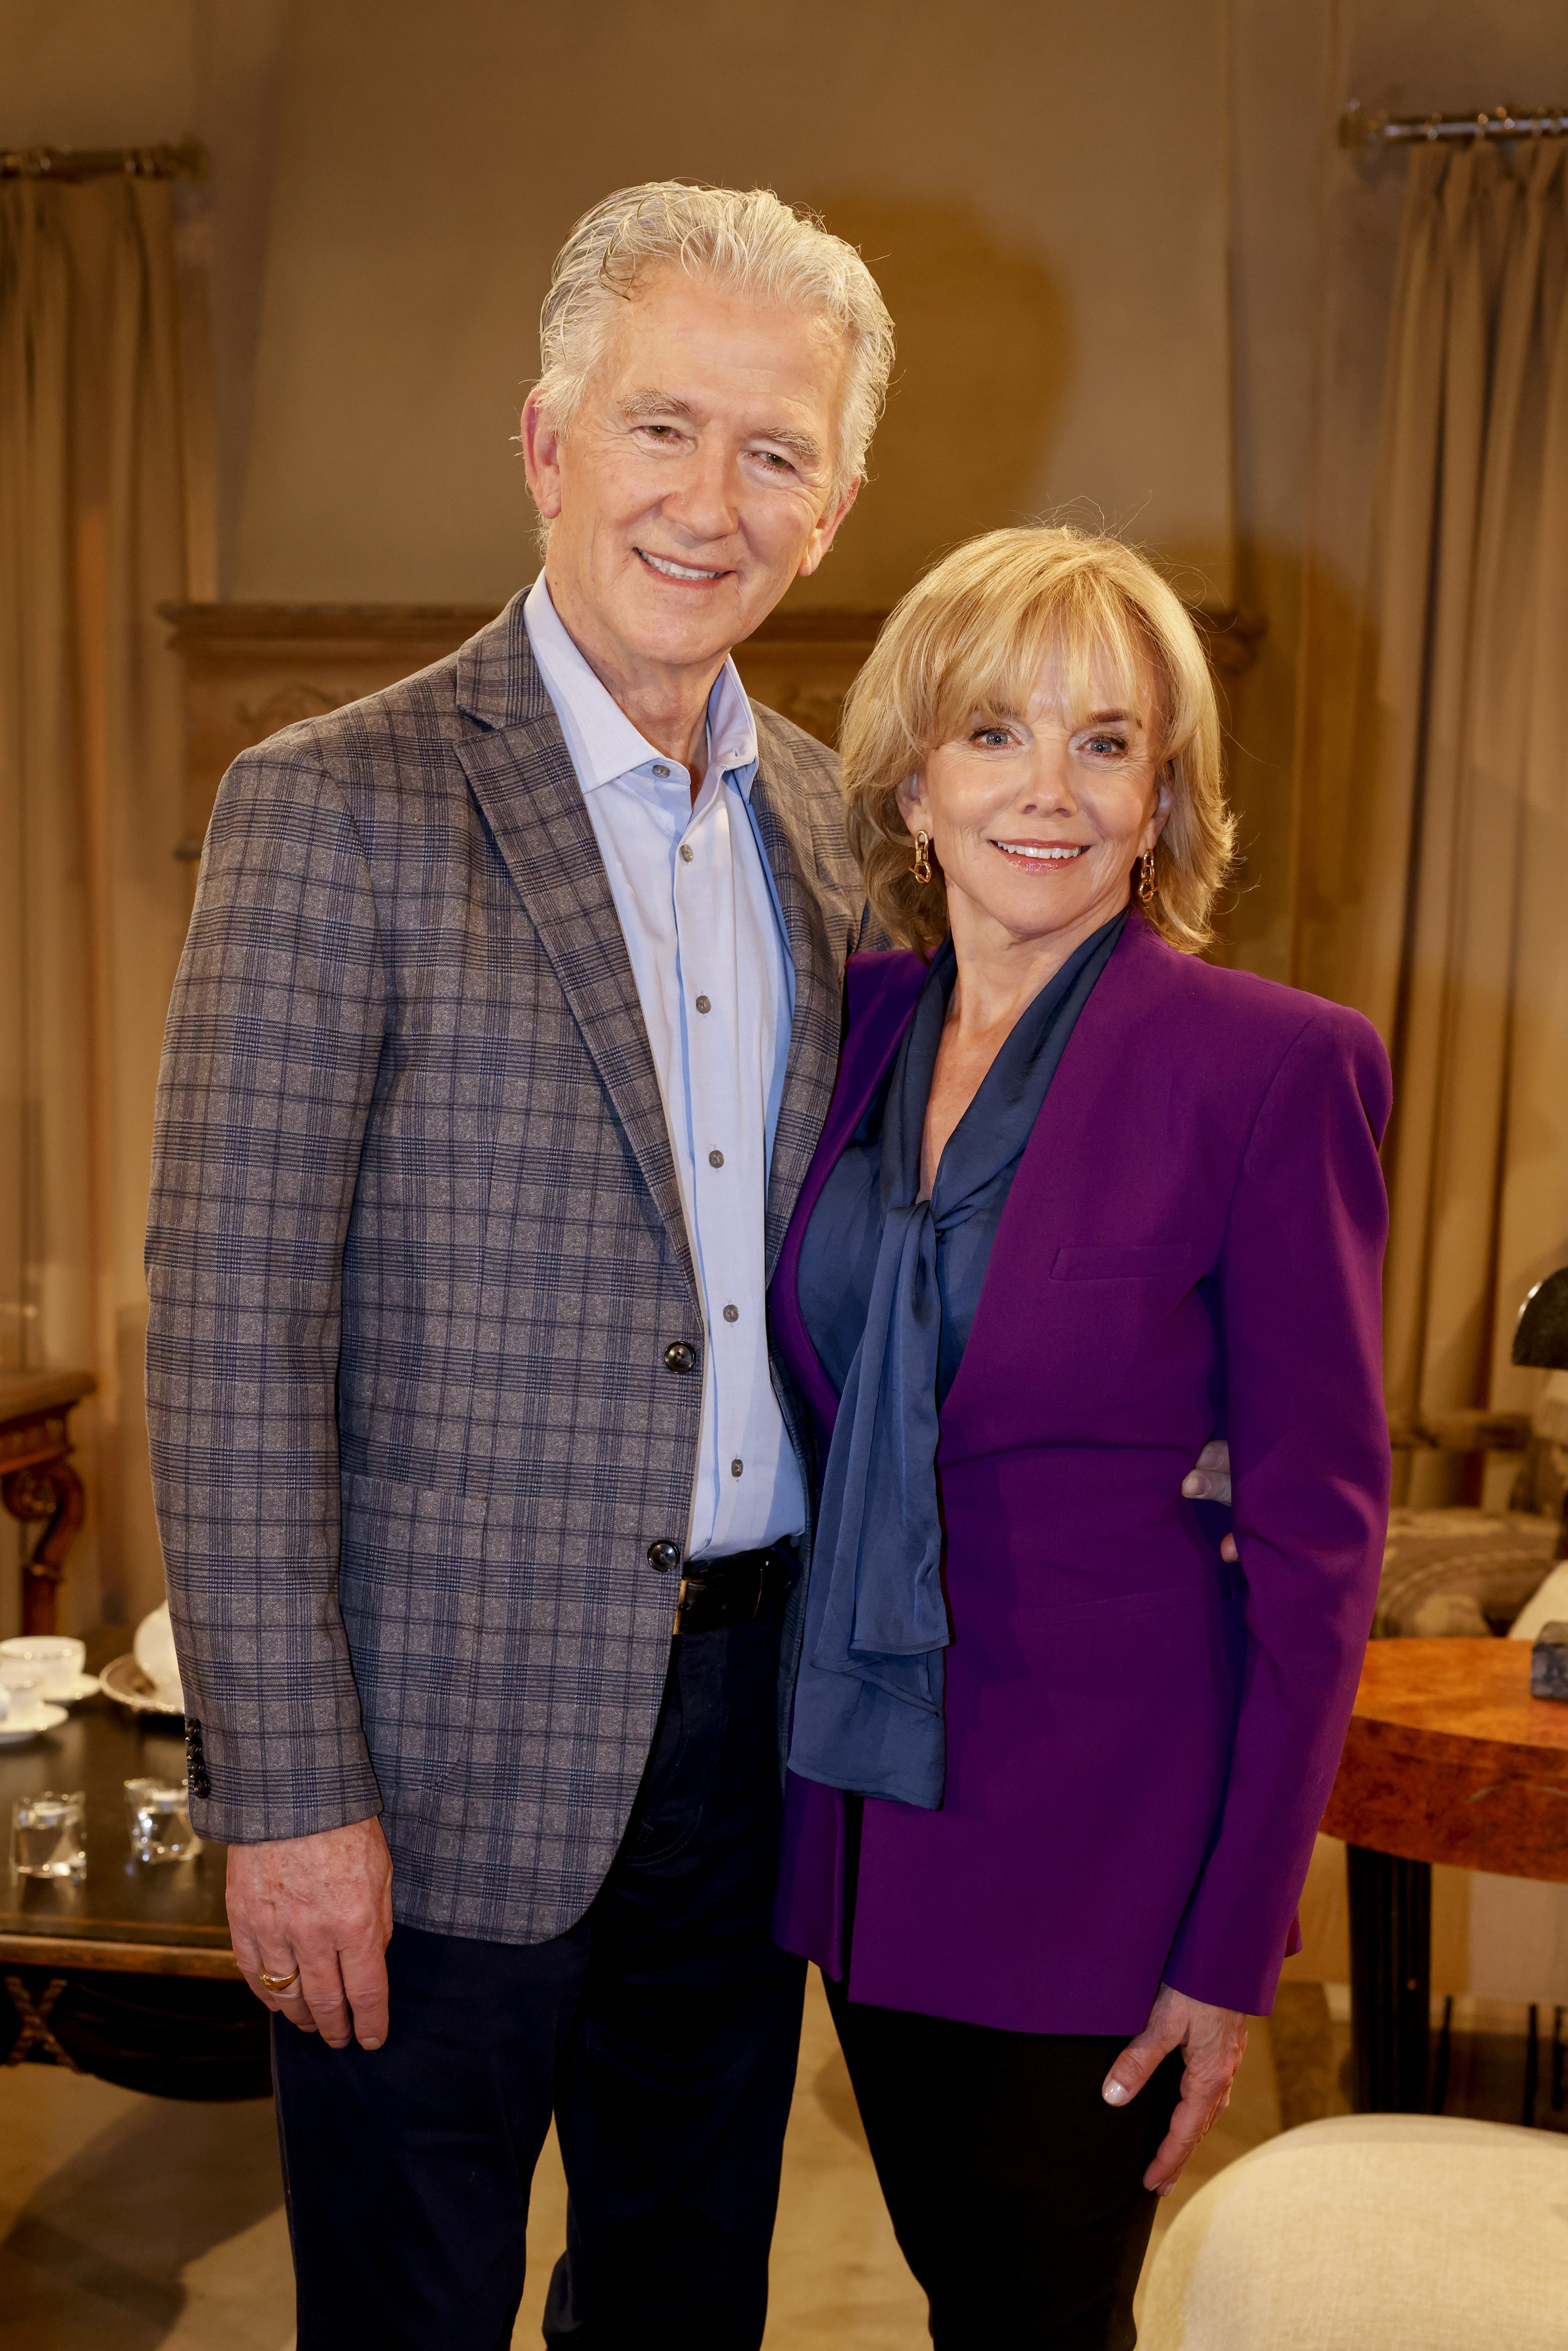 Patrick Duffy and Linda Purl on the set of "The Bold and the Beautiful" on October 24, 2022 in Los Angeles, California | Source: Getty Images